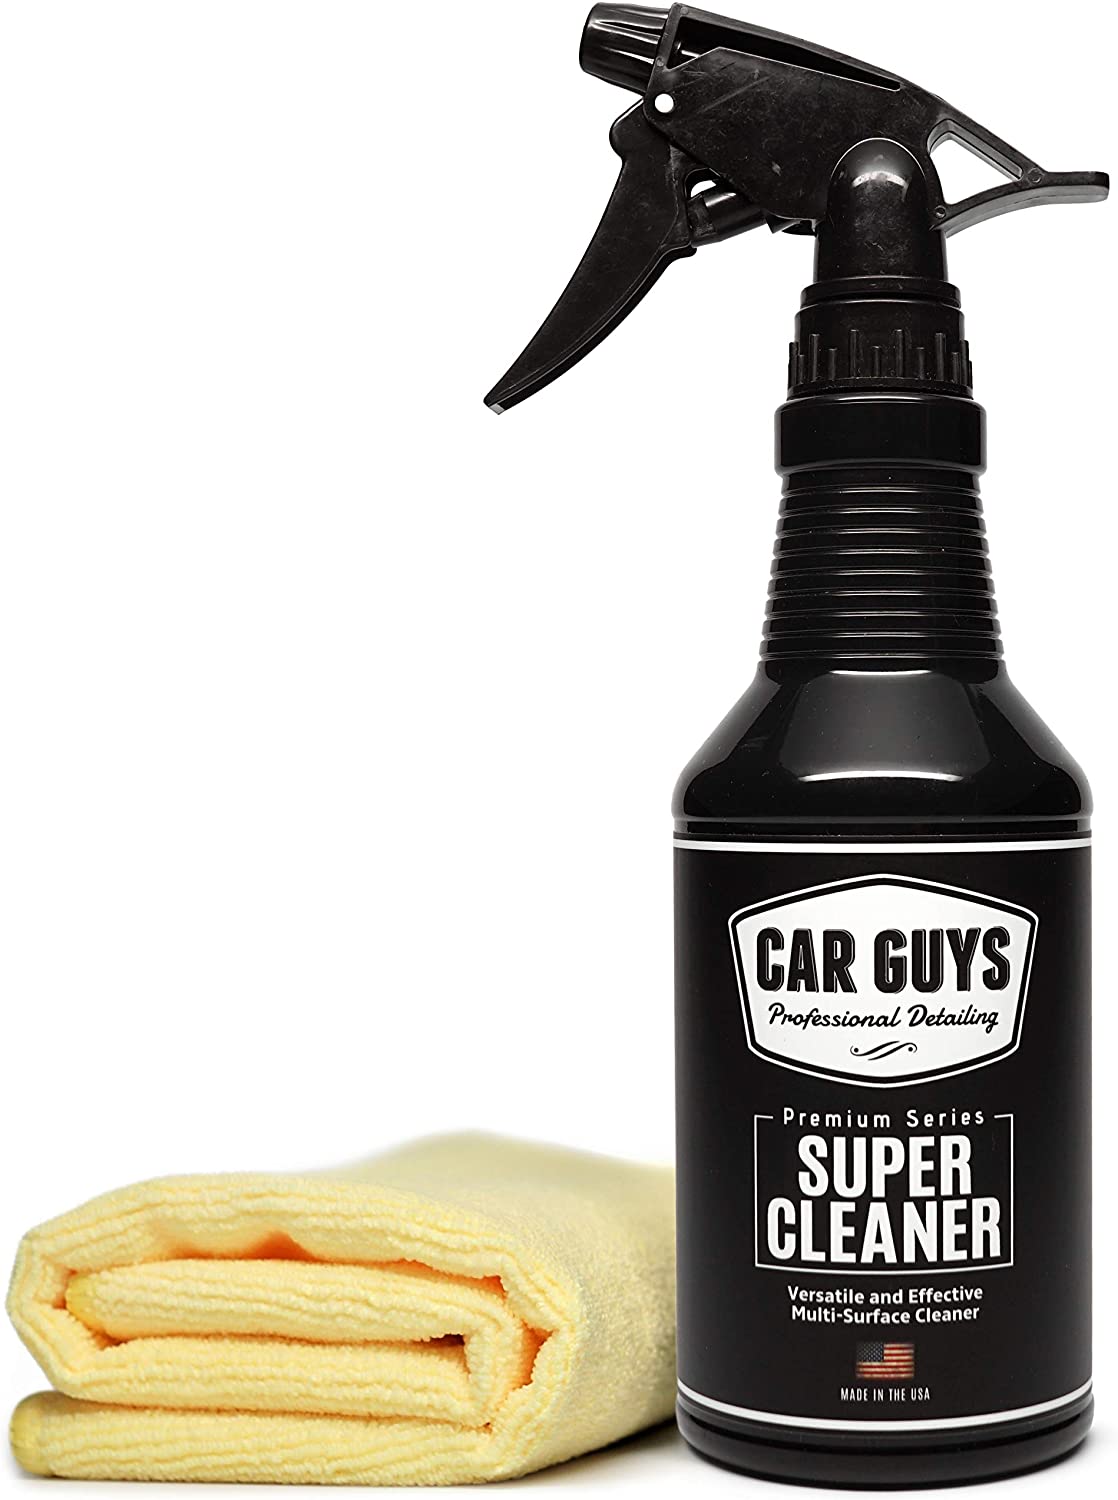 CarGuys Super Cleaner - Effective All Purpose Cleaner - Best for Leather Vinyl Carpet Upholstery Plastic Rubber and Much More! - 18 oz Kit - image 1 of 5